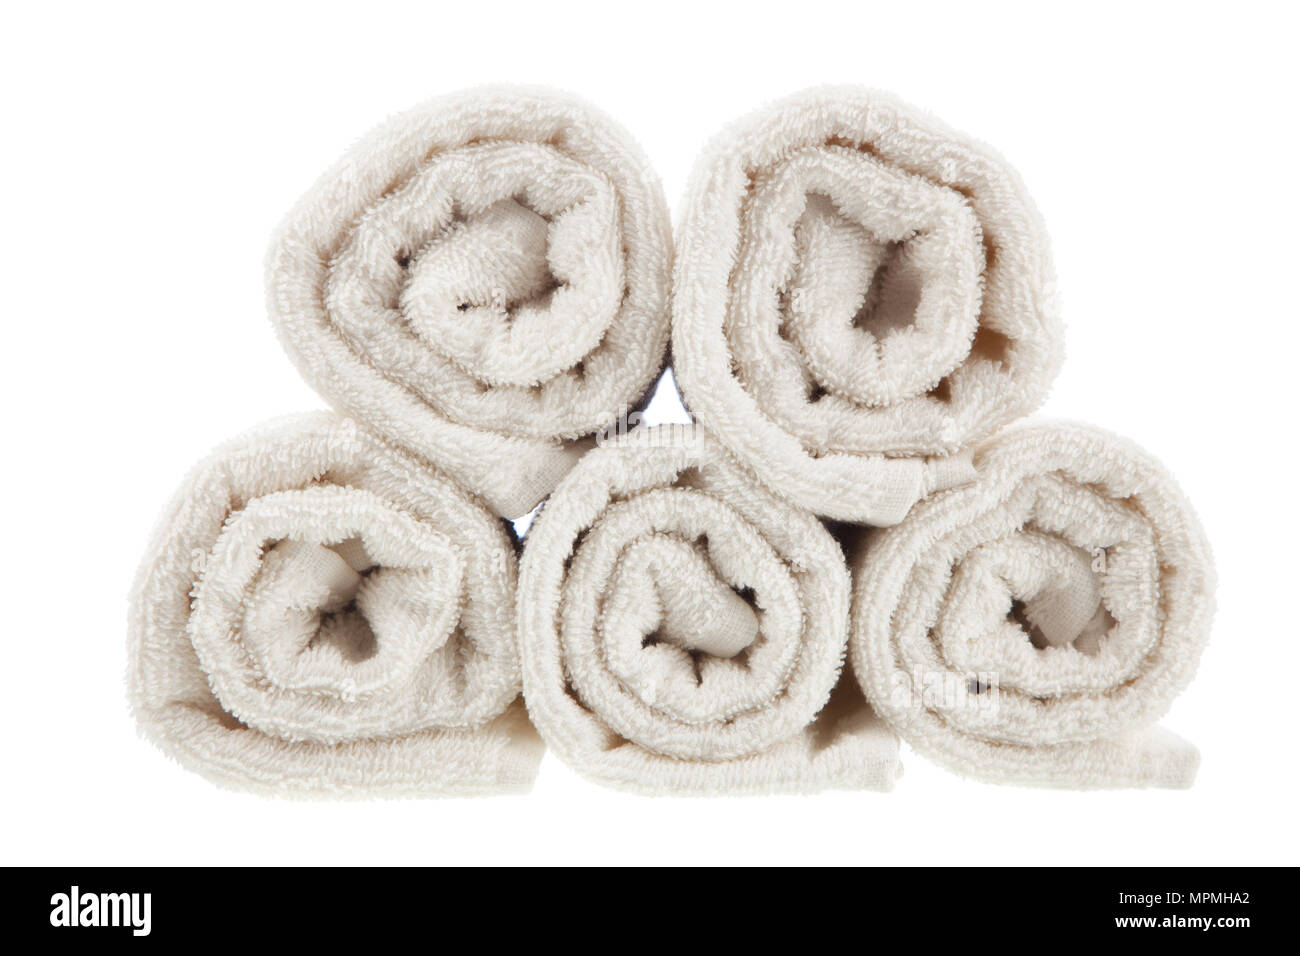 Fresh Clean Towels on Wooden Table Stock Image - Image of laundry, hotel:  136301025